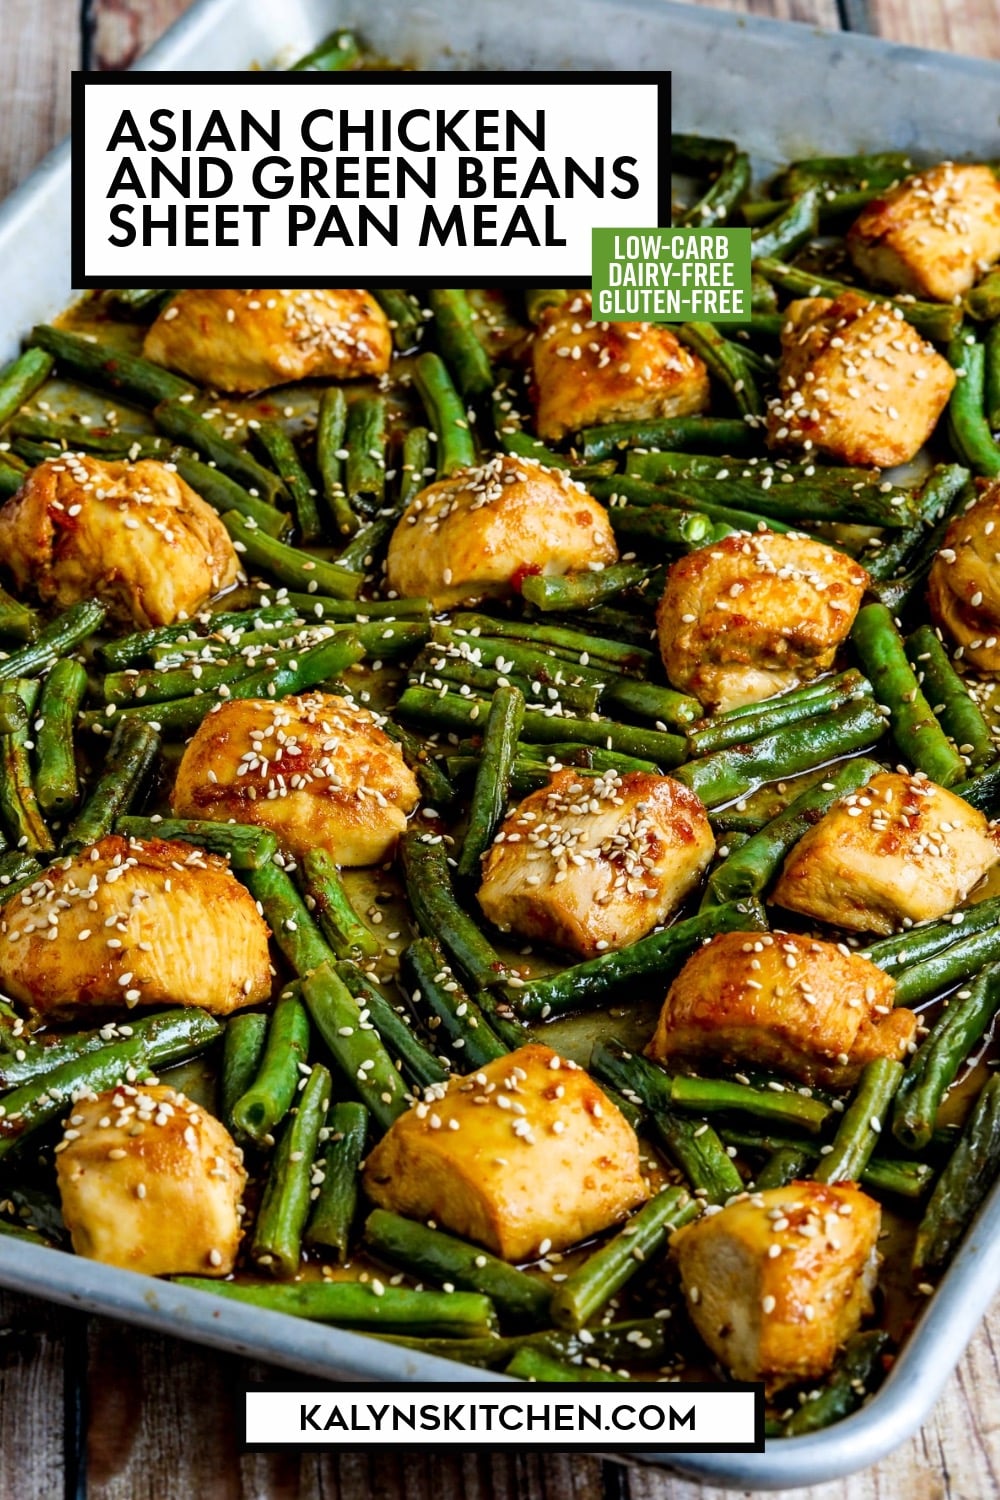 Pinterest image of Asian Chicken and Green Beans Sheet Pan Meal